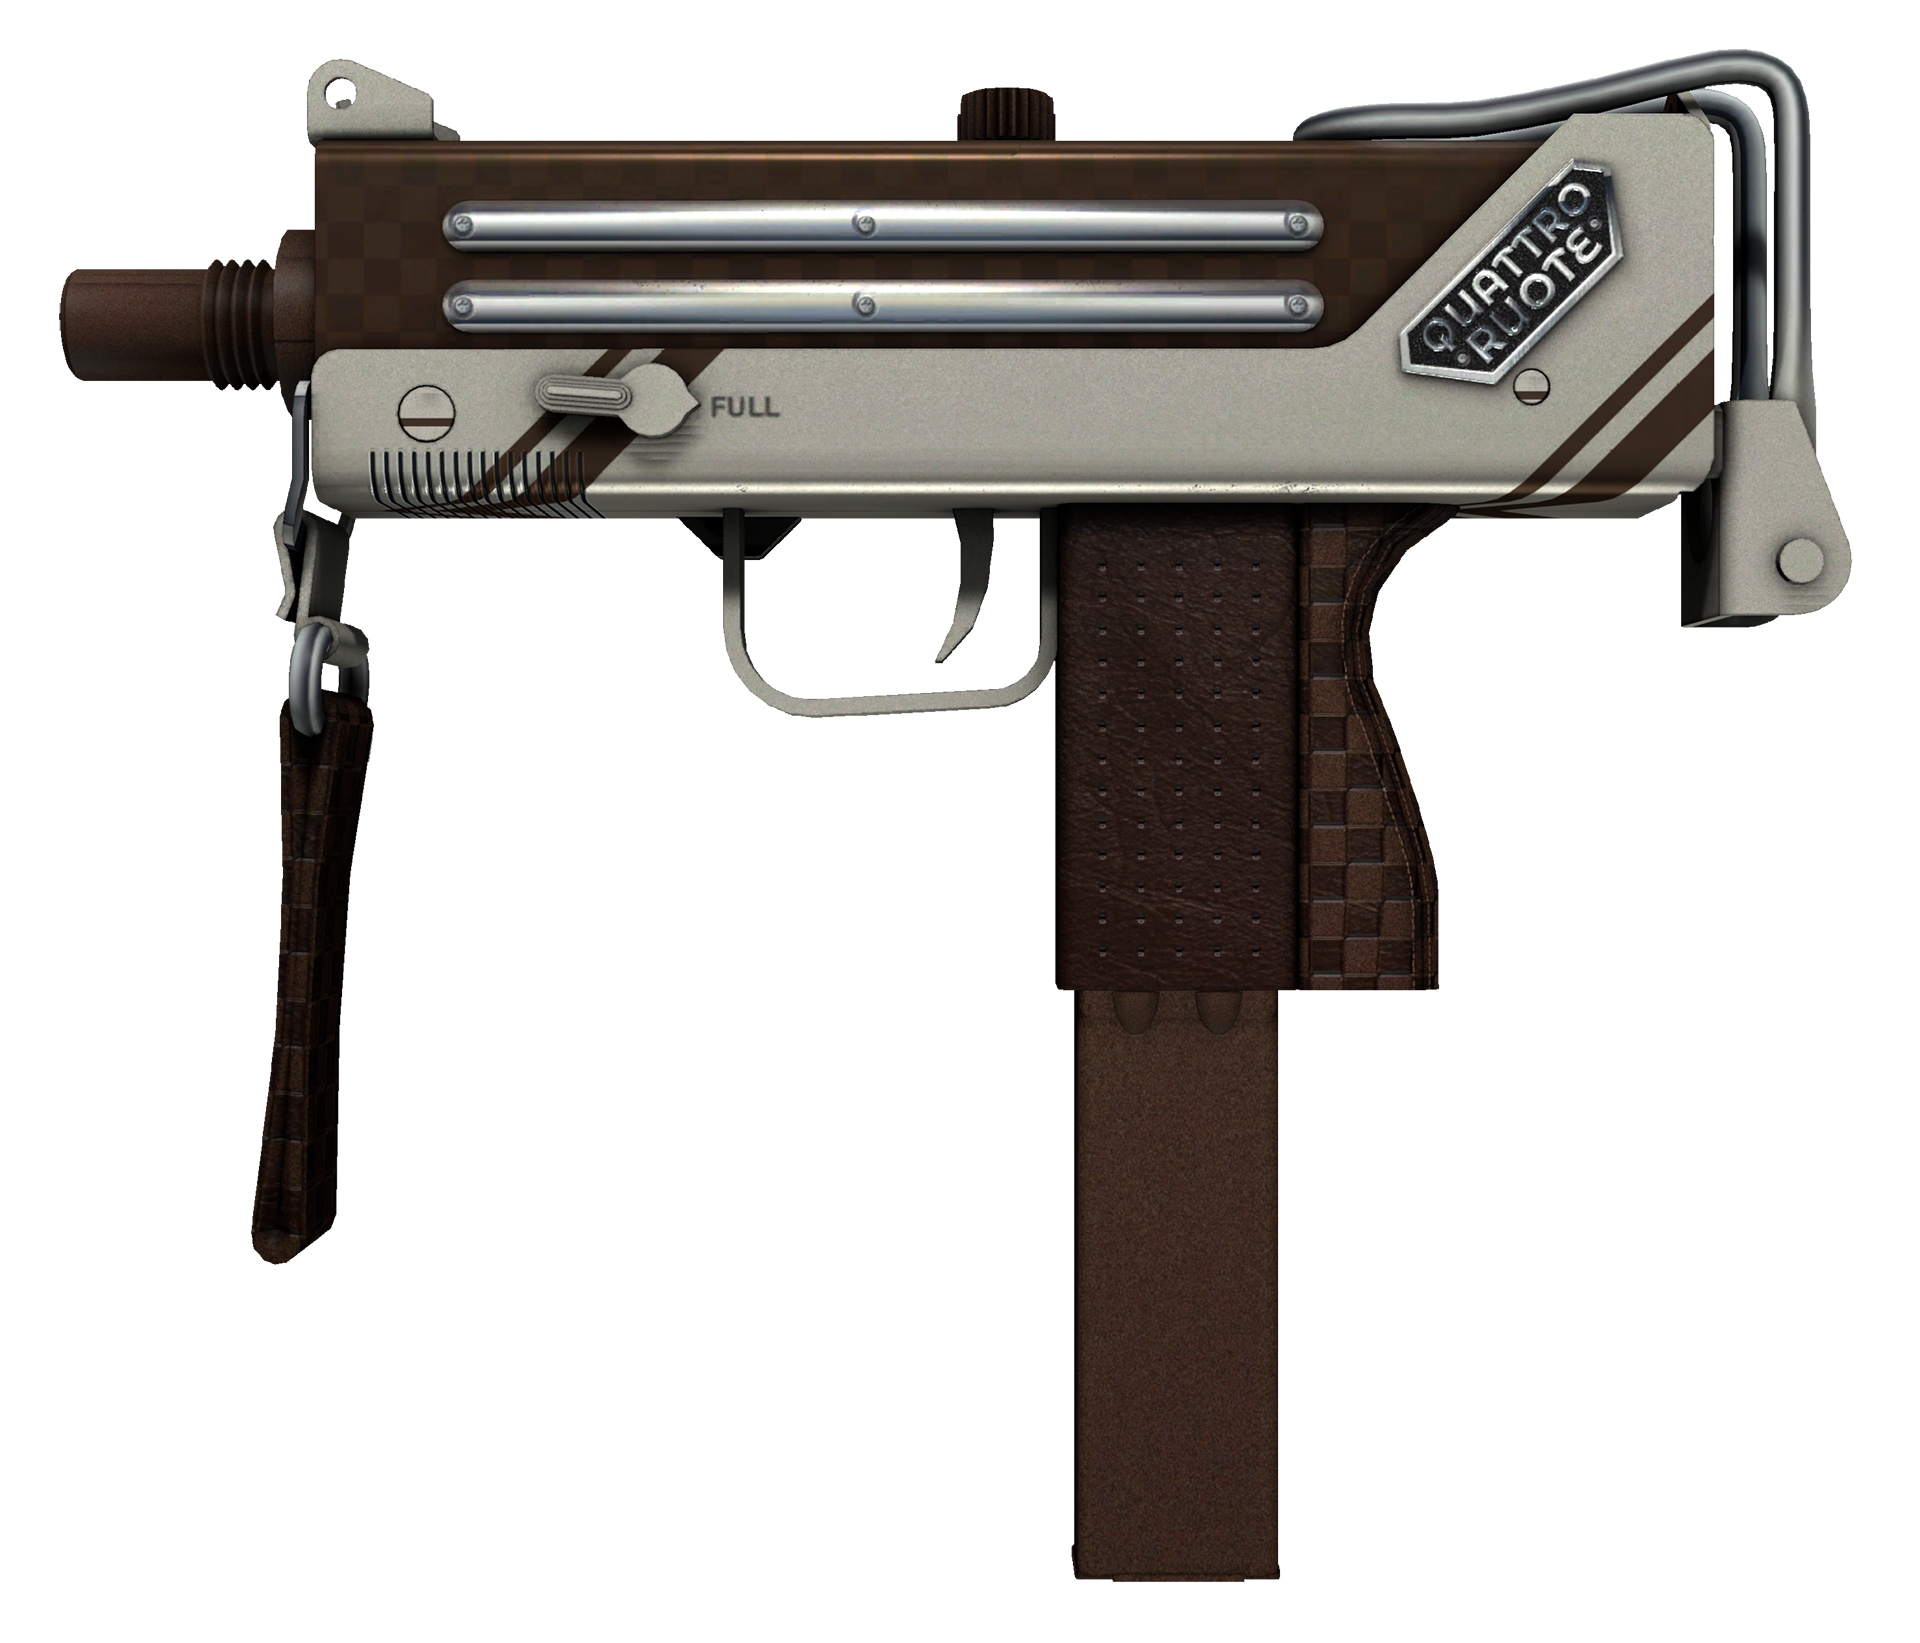 MAC-10 Malachite cs go skin for android download